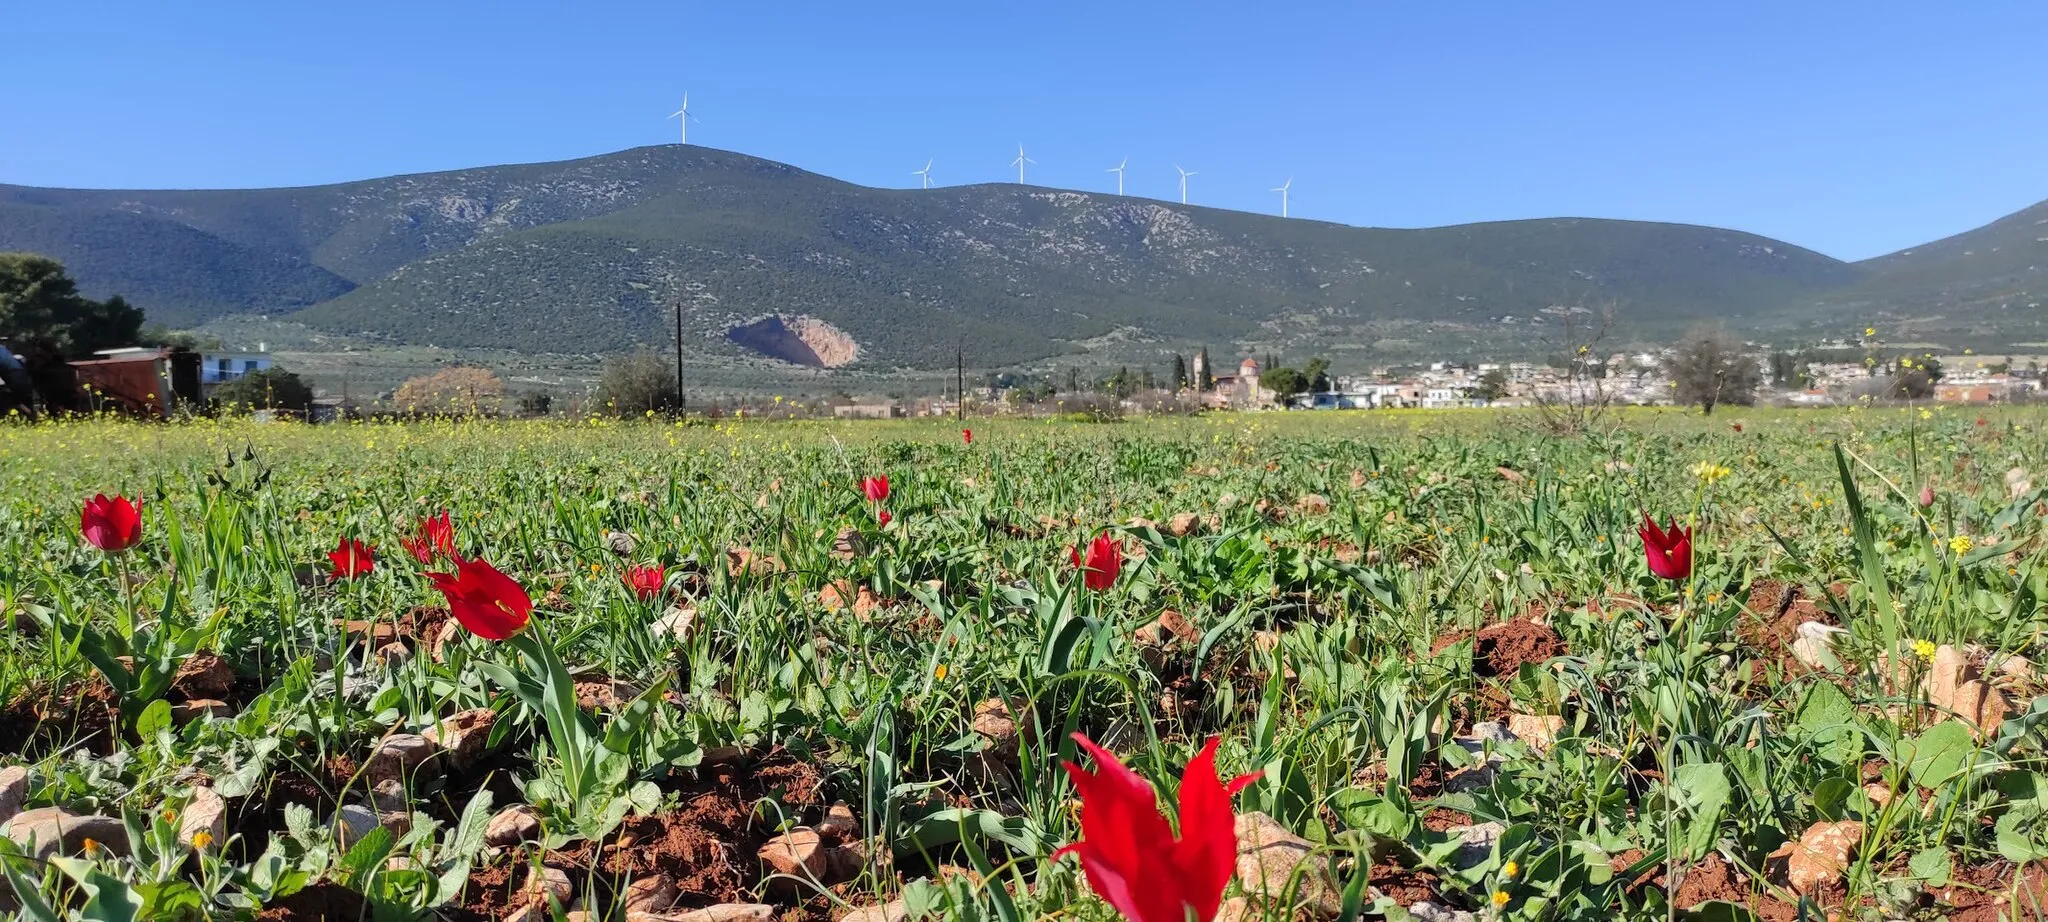 Photo showing: Photo of a field with tulips.
The big doline cave and church can be seen as well.